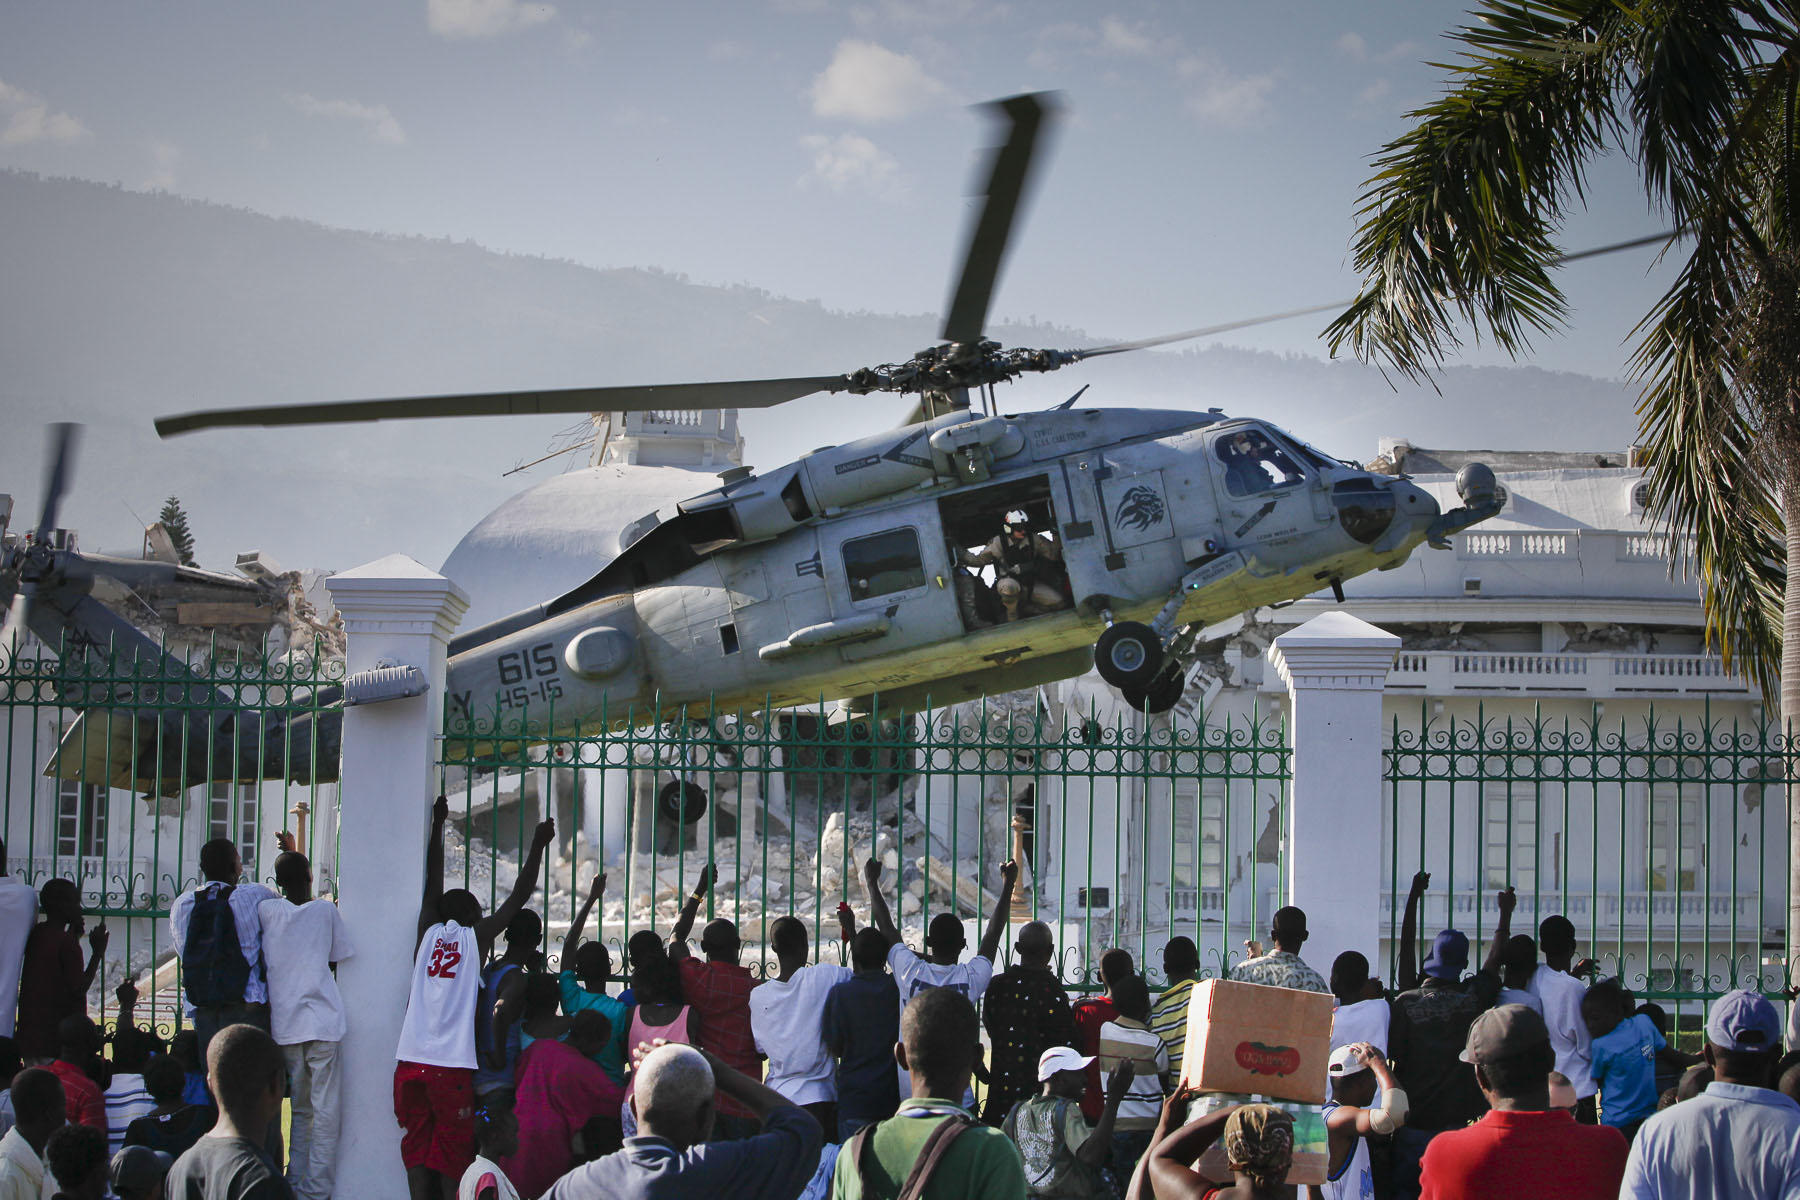 A US helicopter landing on the National Palace lawn on January 19, 2010